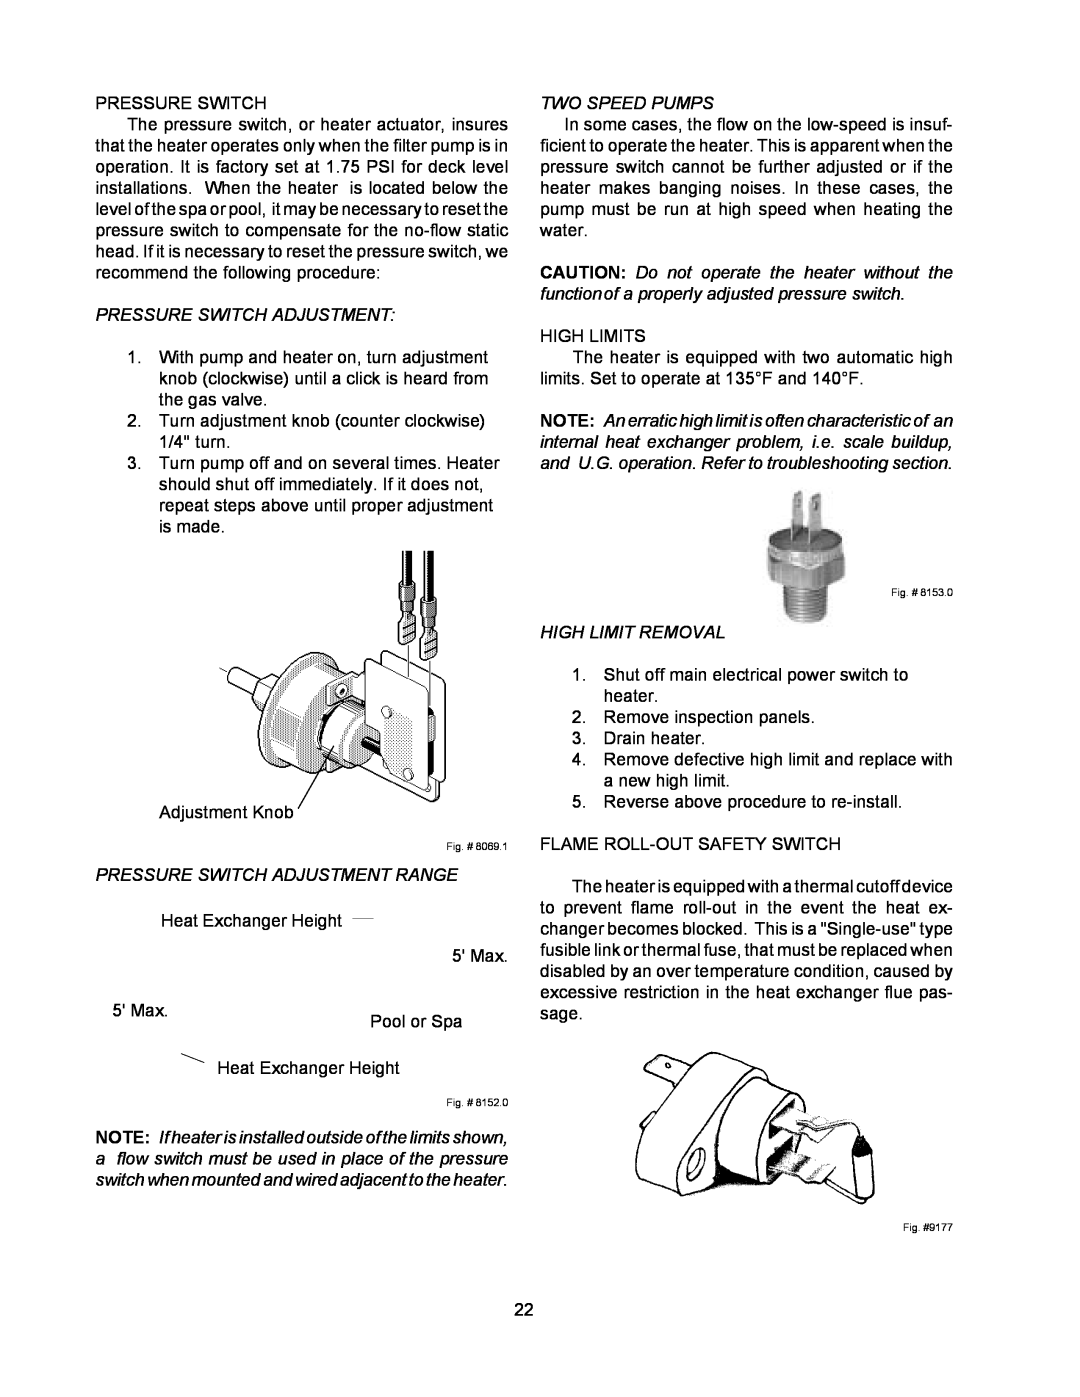 Raypak 155C Two Speed Pumps, Pressure Switch Adjustment Range, NOTE If heater is installed outside of the limits shown 